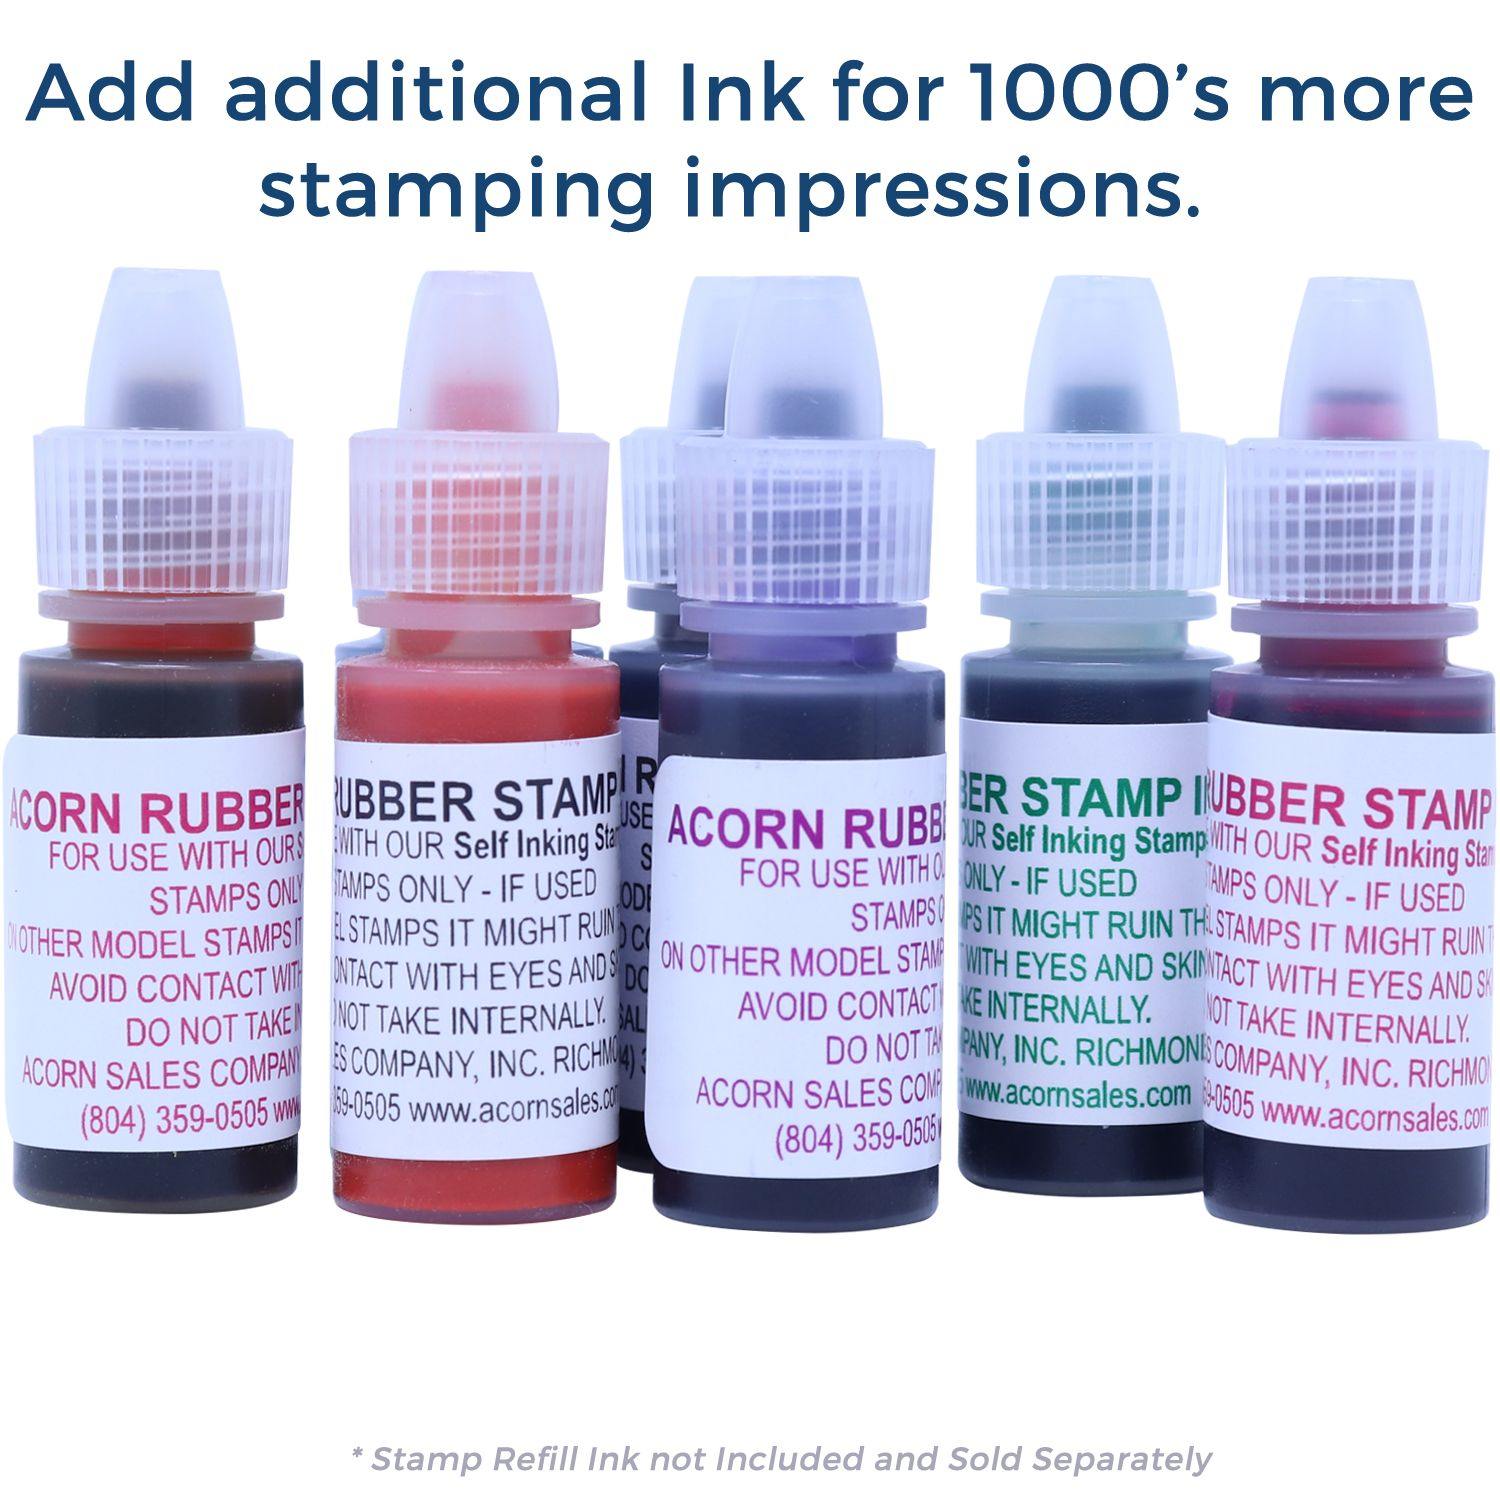 Refill Inks for Large Pre-Inked Amortizado Stamp Available